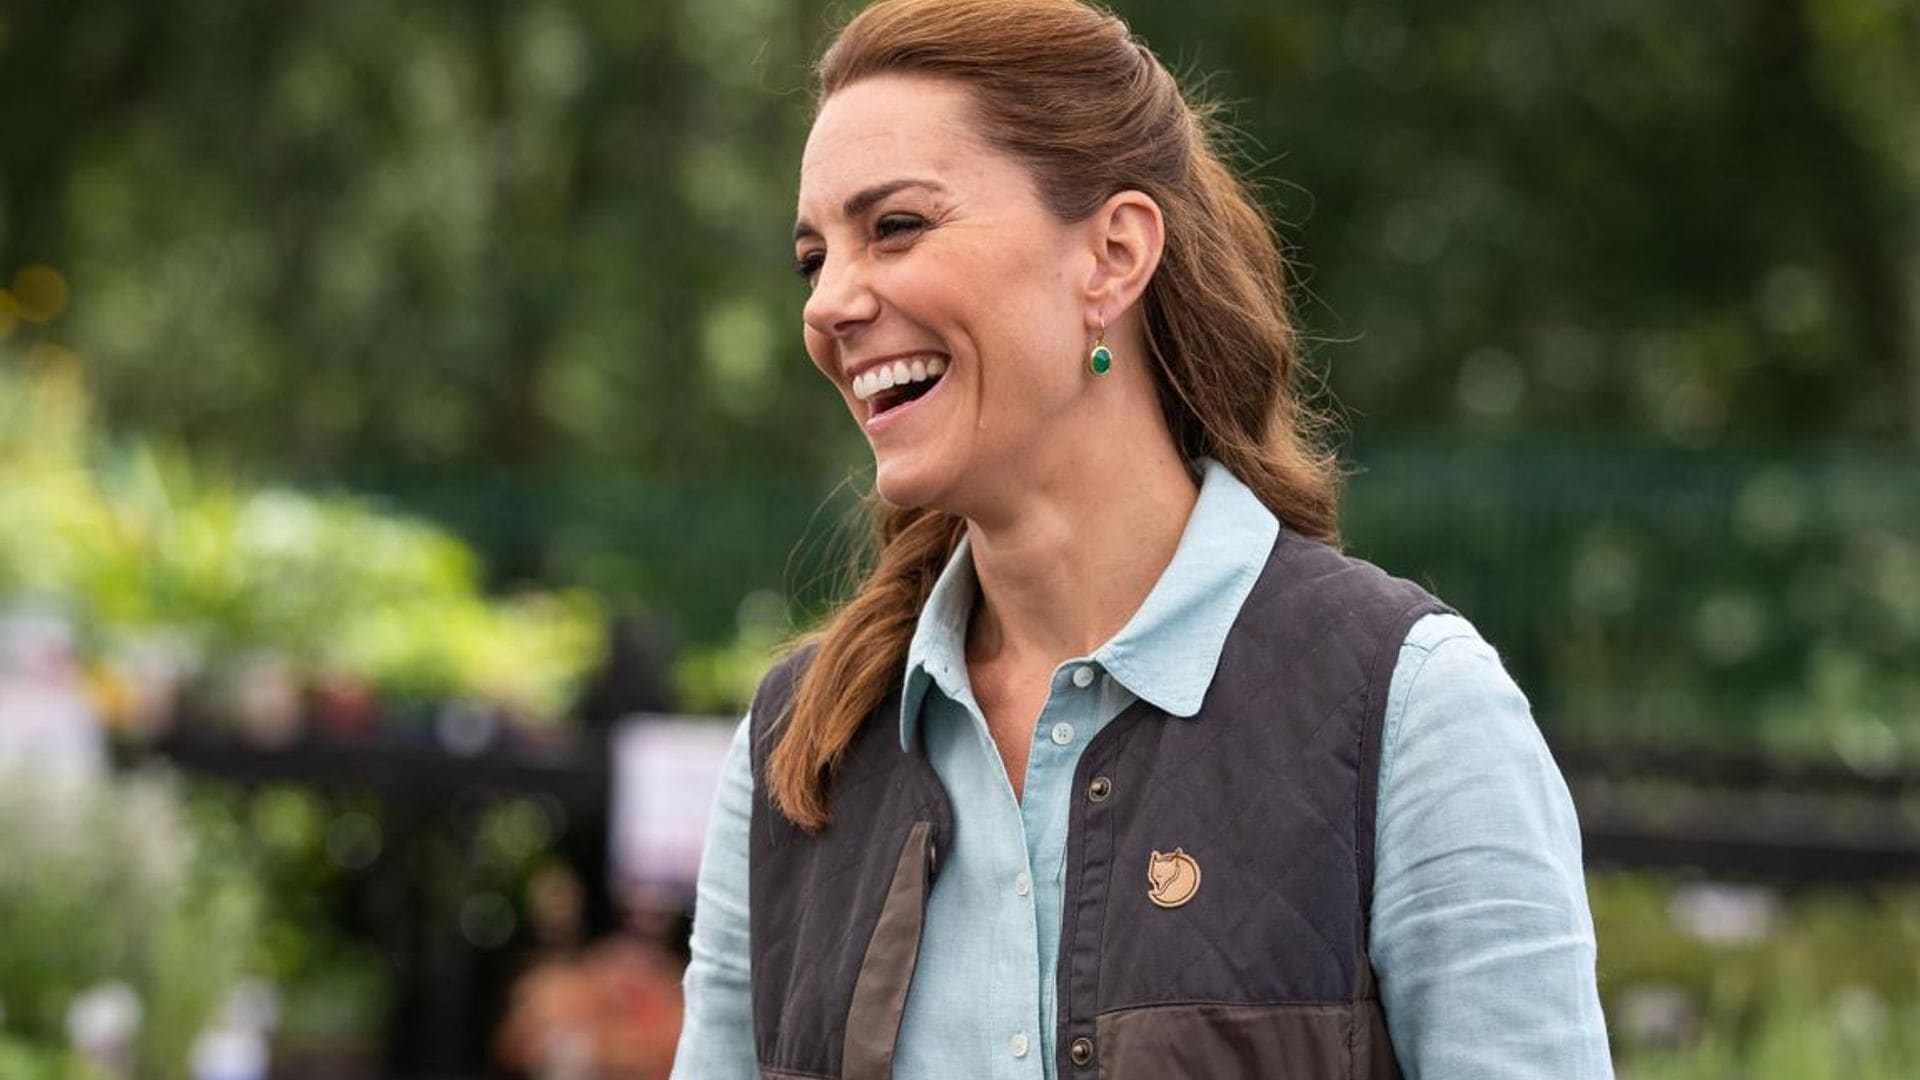 Kate Middleton rocks new hair color and skinny jeans on first public appearance